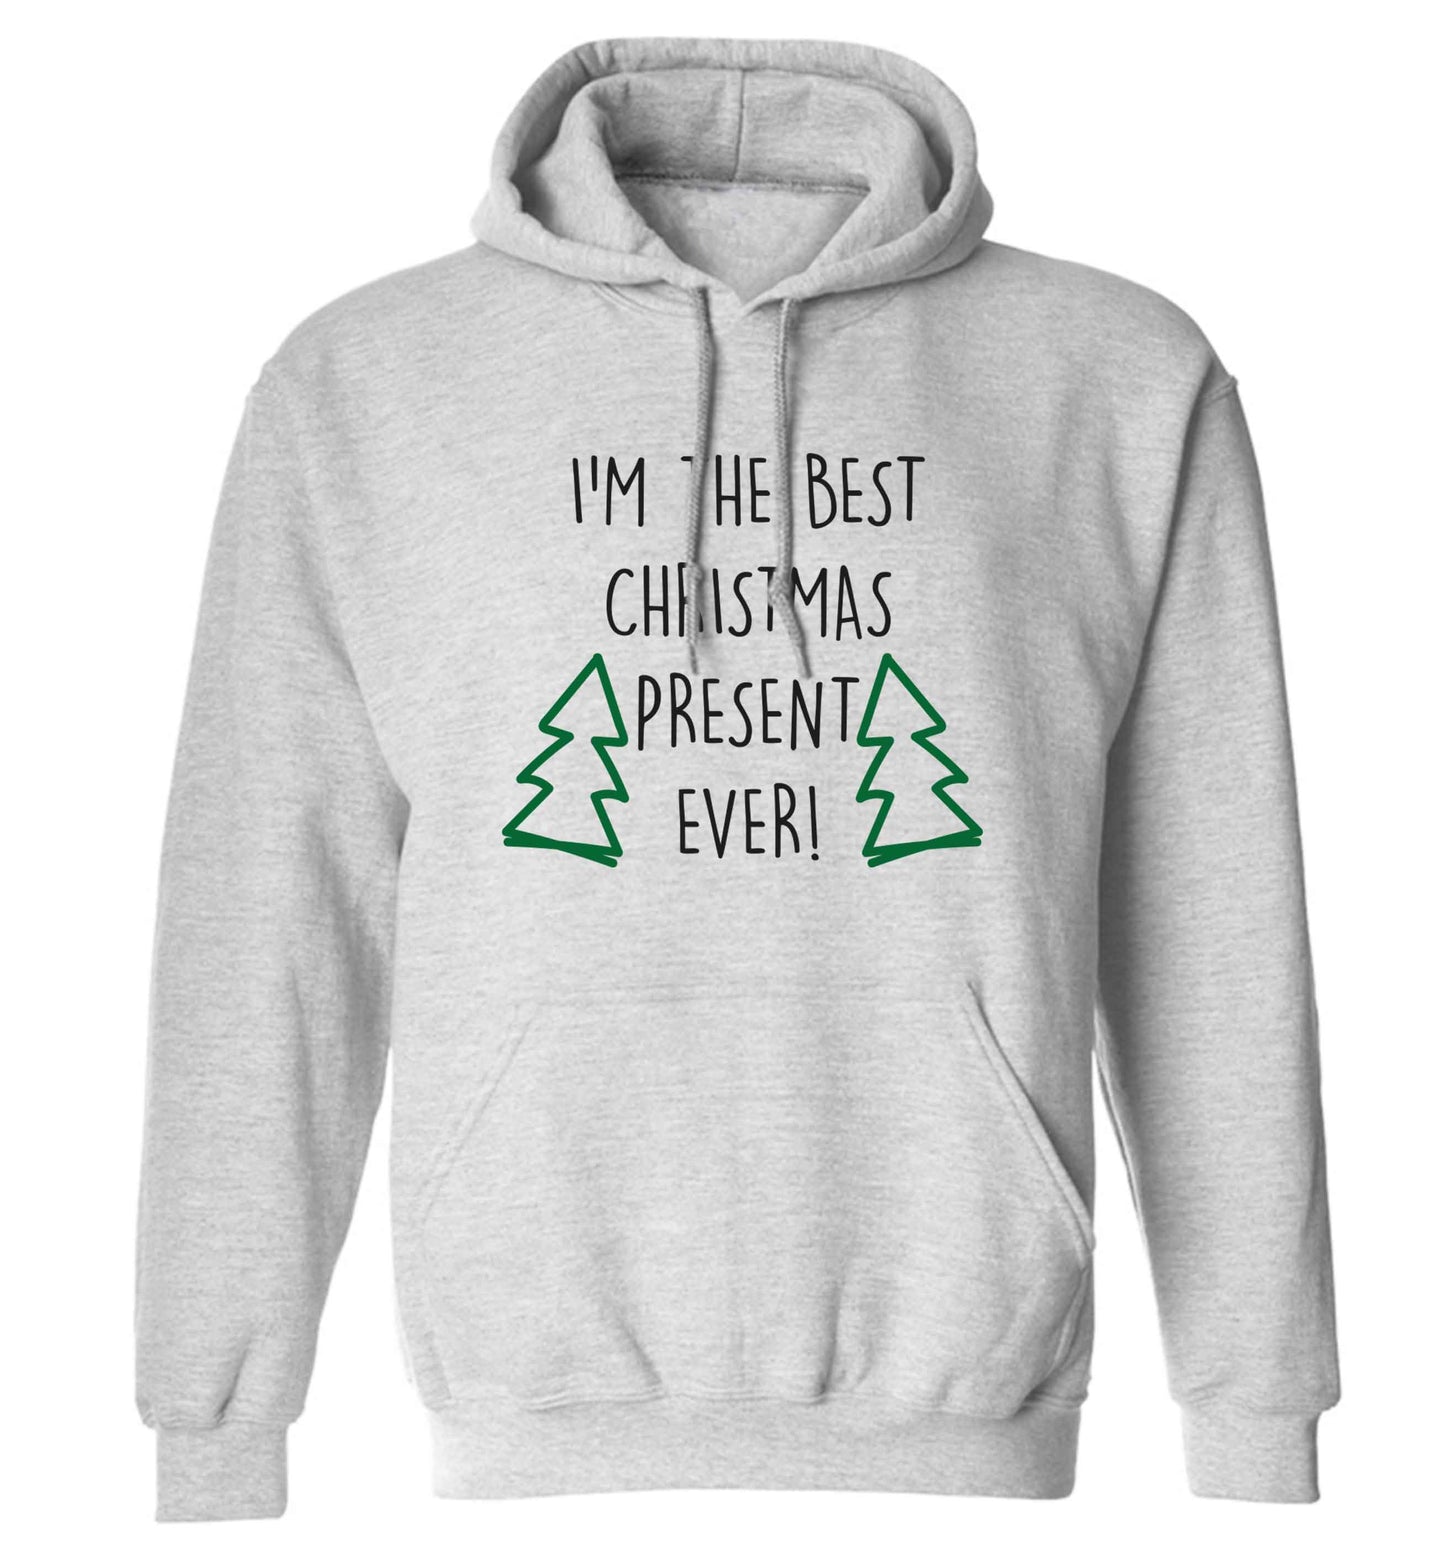 I'm the best Christmas present ever adults unisex grey hoodie 2XL